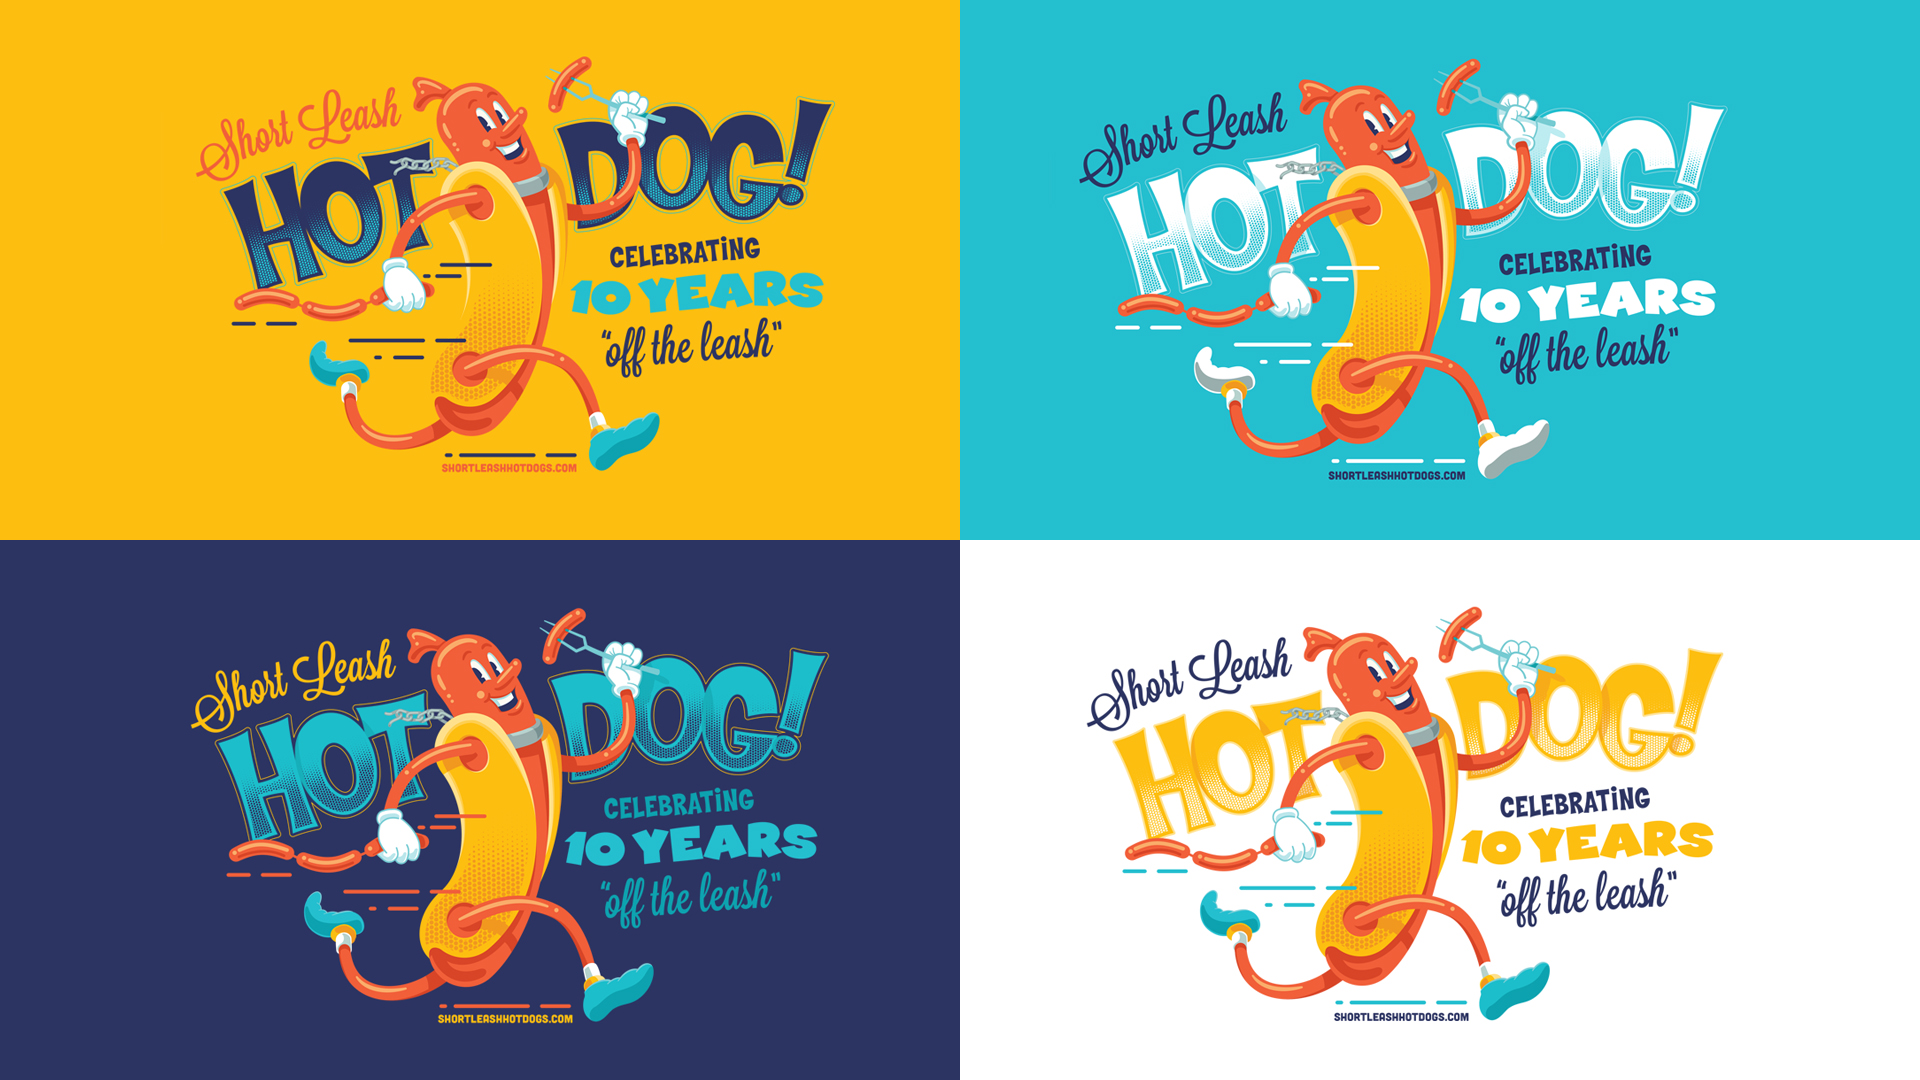 featured image three:Shortleash Hot Dogs 10th Anniversary